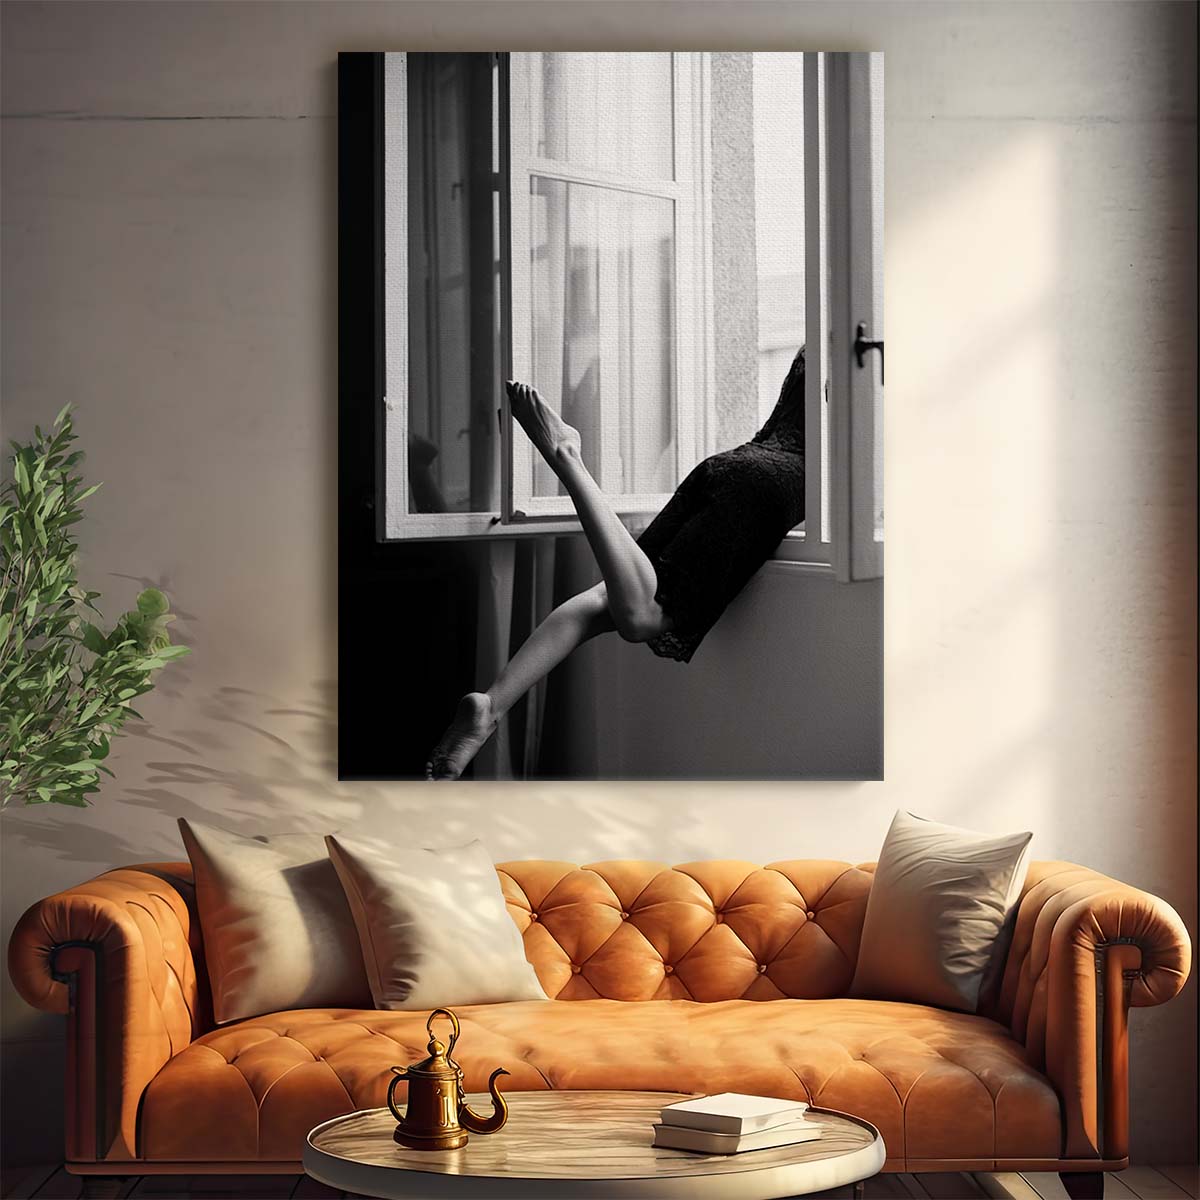 Vintage Monochrome Woman Portrait, Abstract Jazz Mood Photography Art by Luxuriance Designs, made in USA